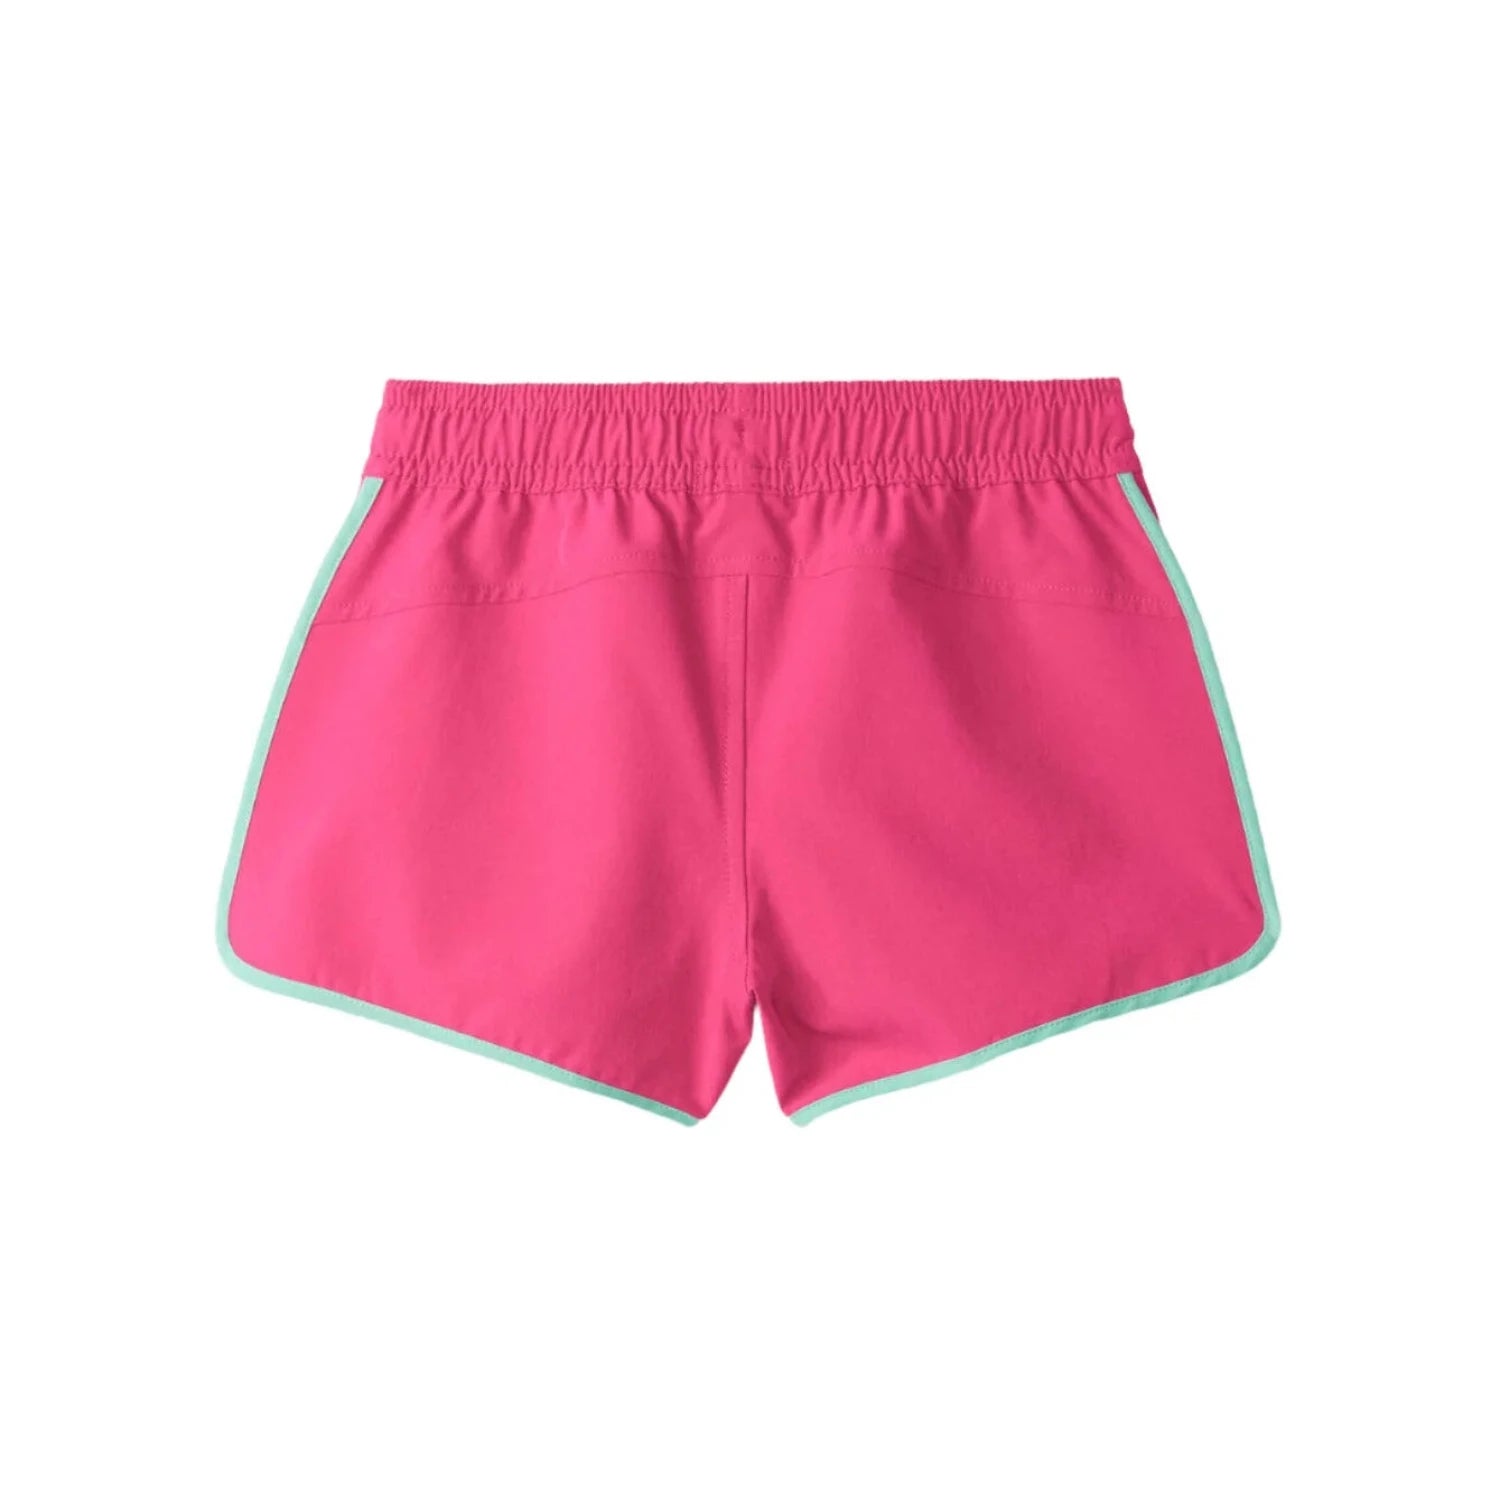 Hatley Girl's Pink Quick Dry Shorts shown in the Pink color option. Back view.